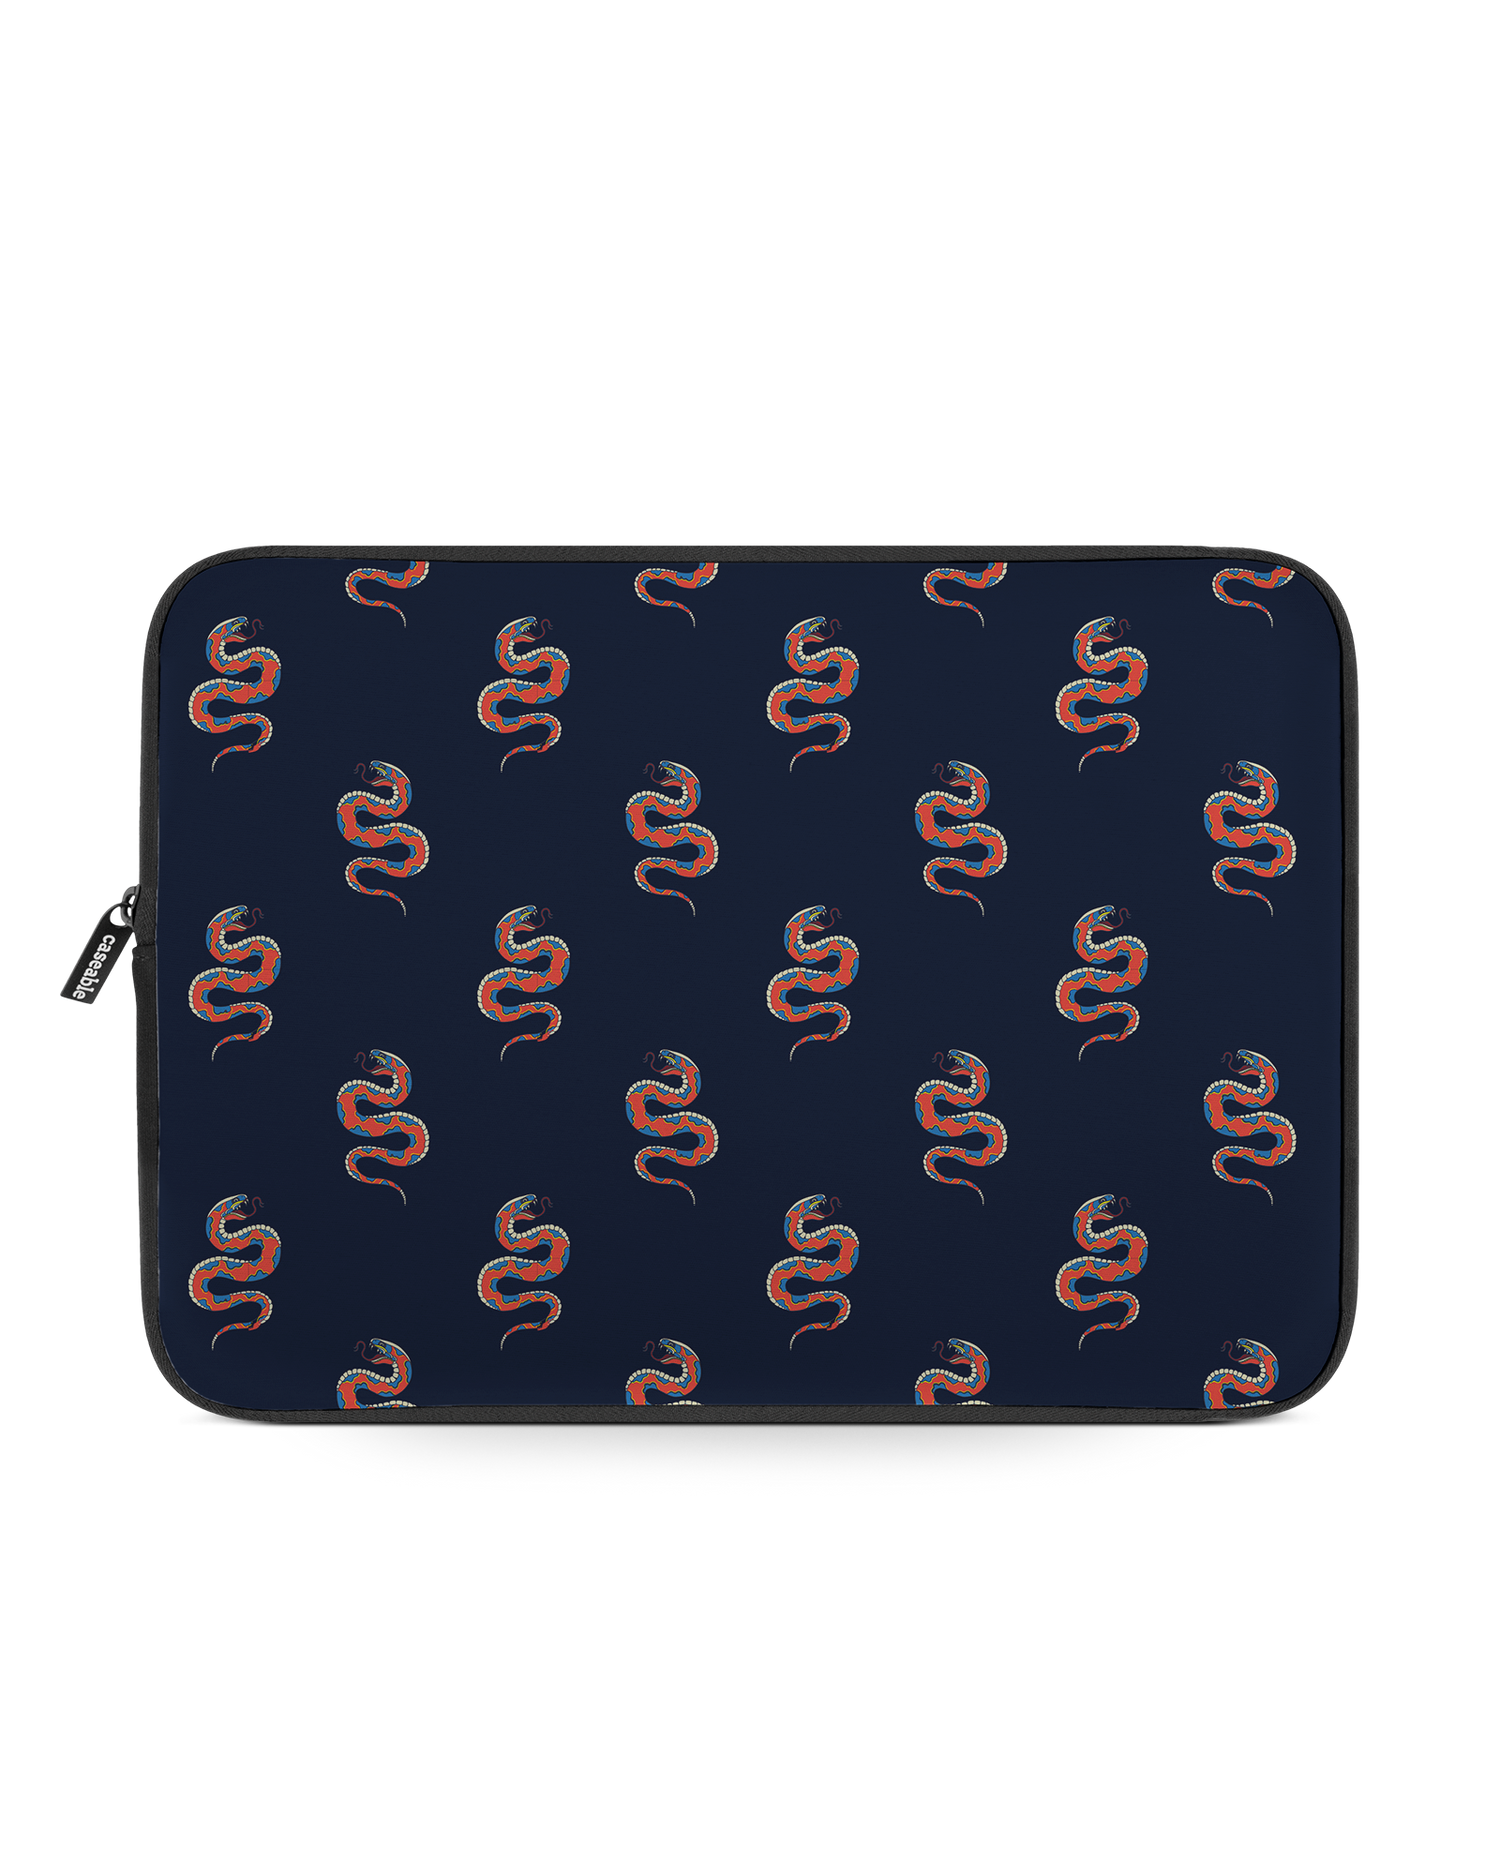 Repeating Snakes Laptop Case 13-14 inch: Front View